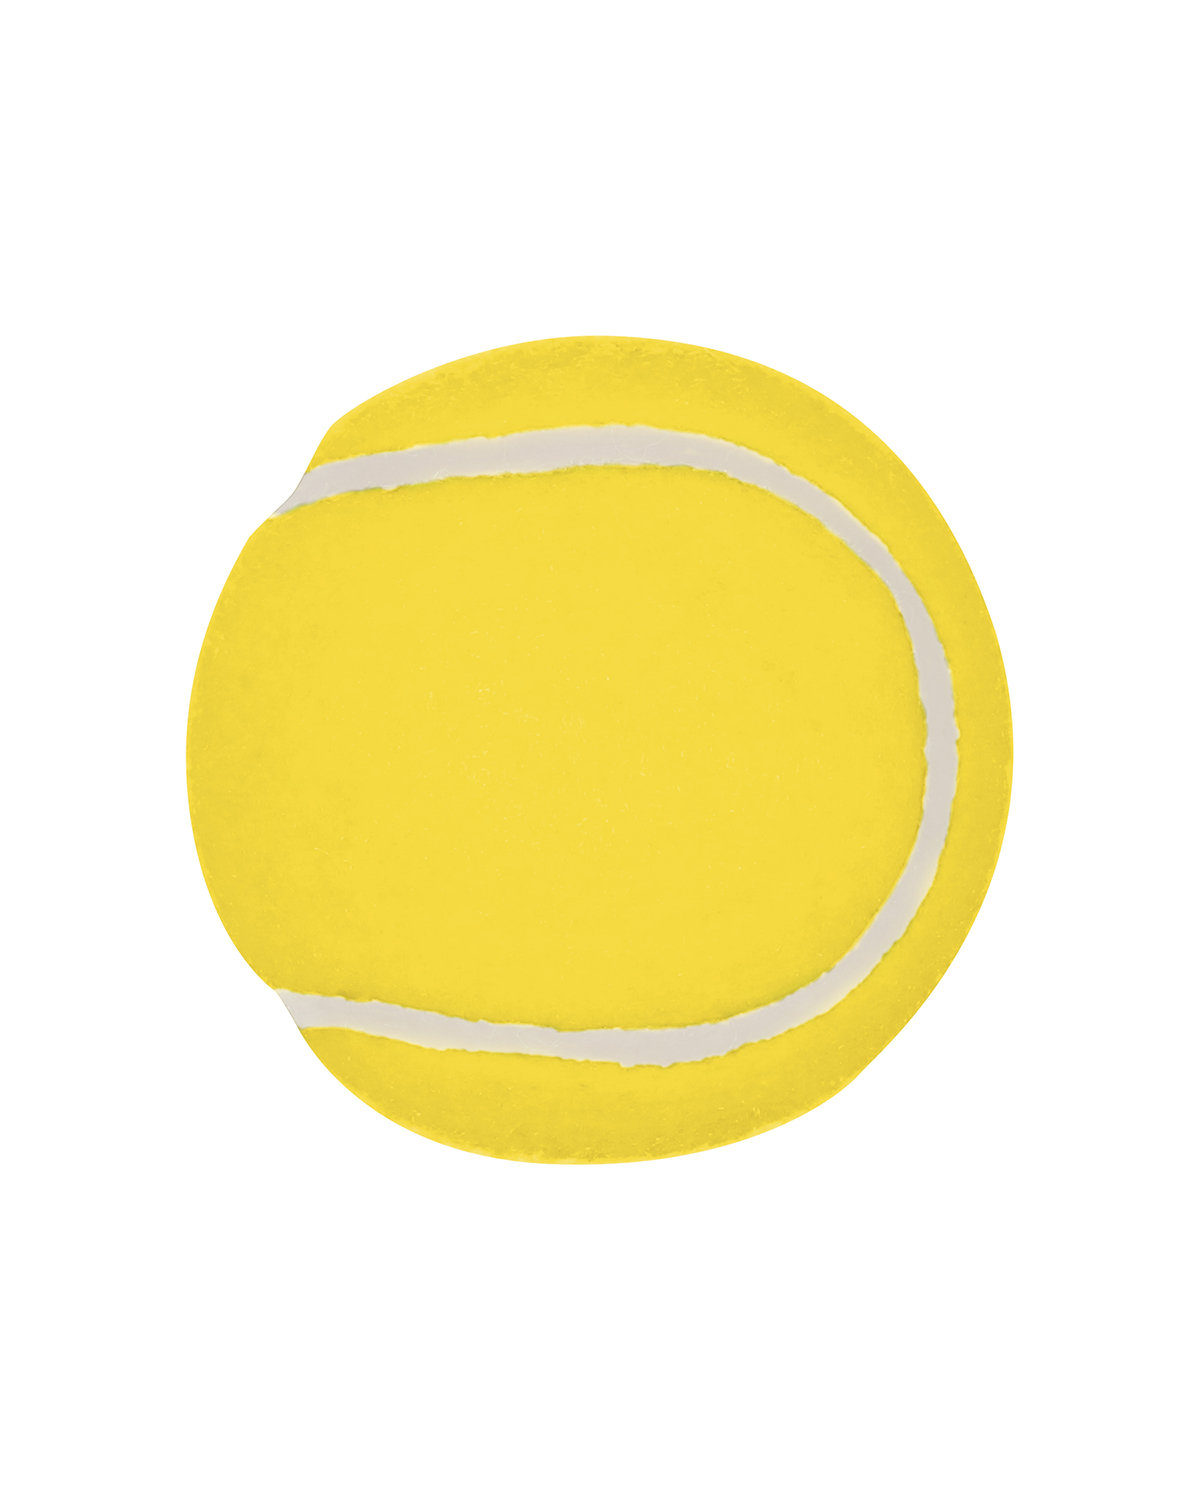 Prime Line Synthetic Promotional Tennis Ball yellow 